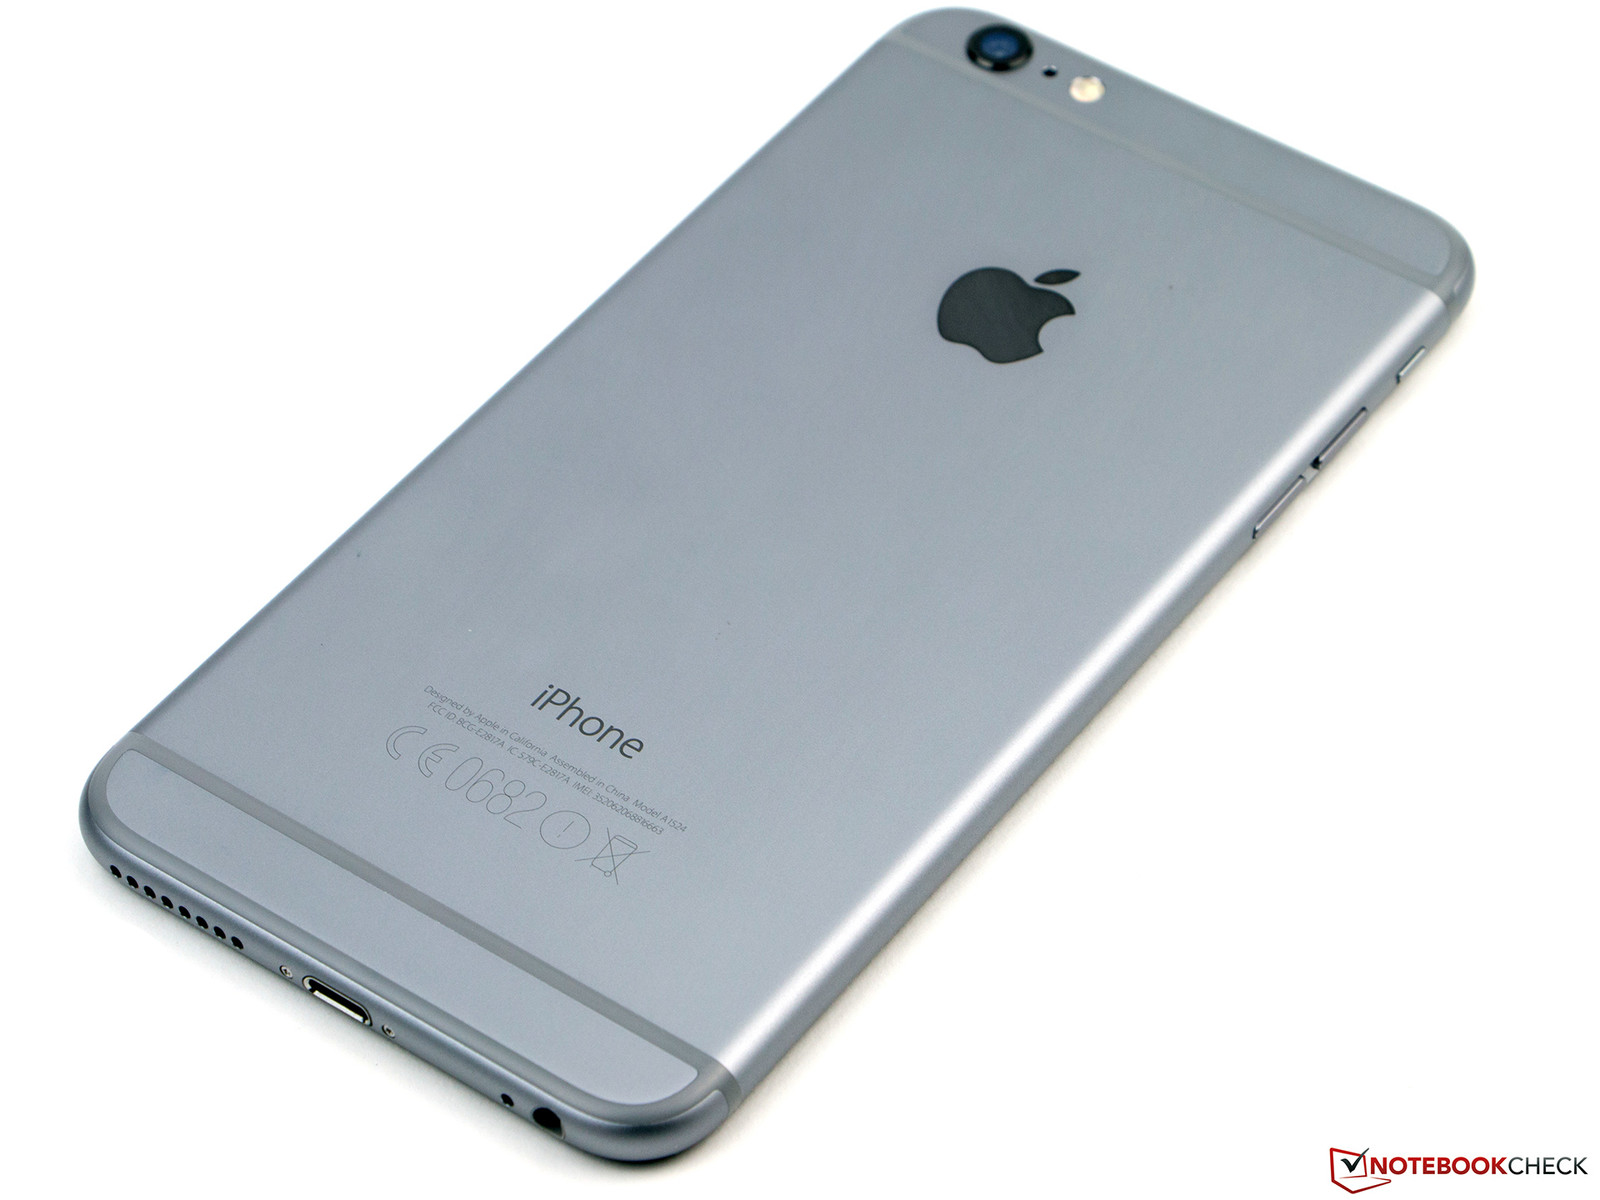 Análisis completo del Smartphone Apple iPhone 6 Plus - Notebookcheck.org